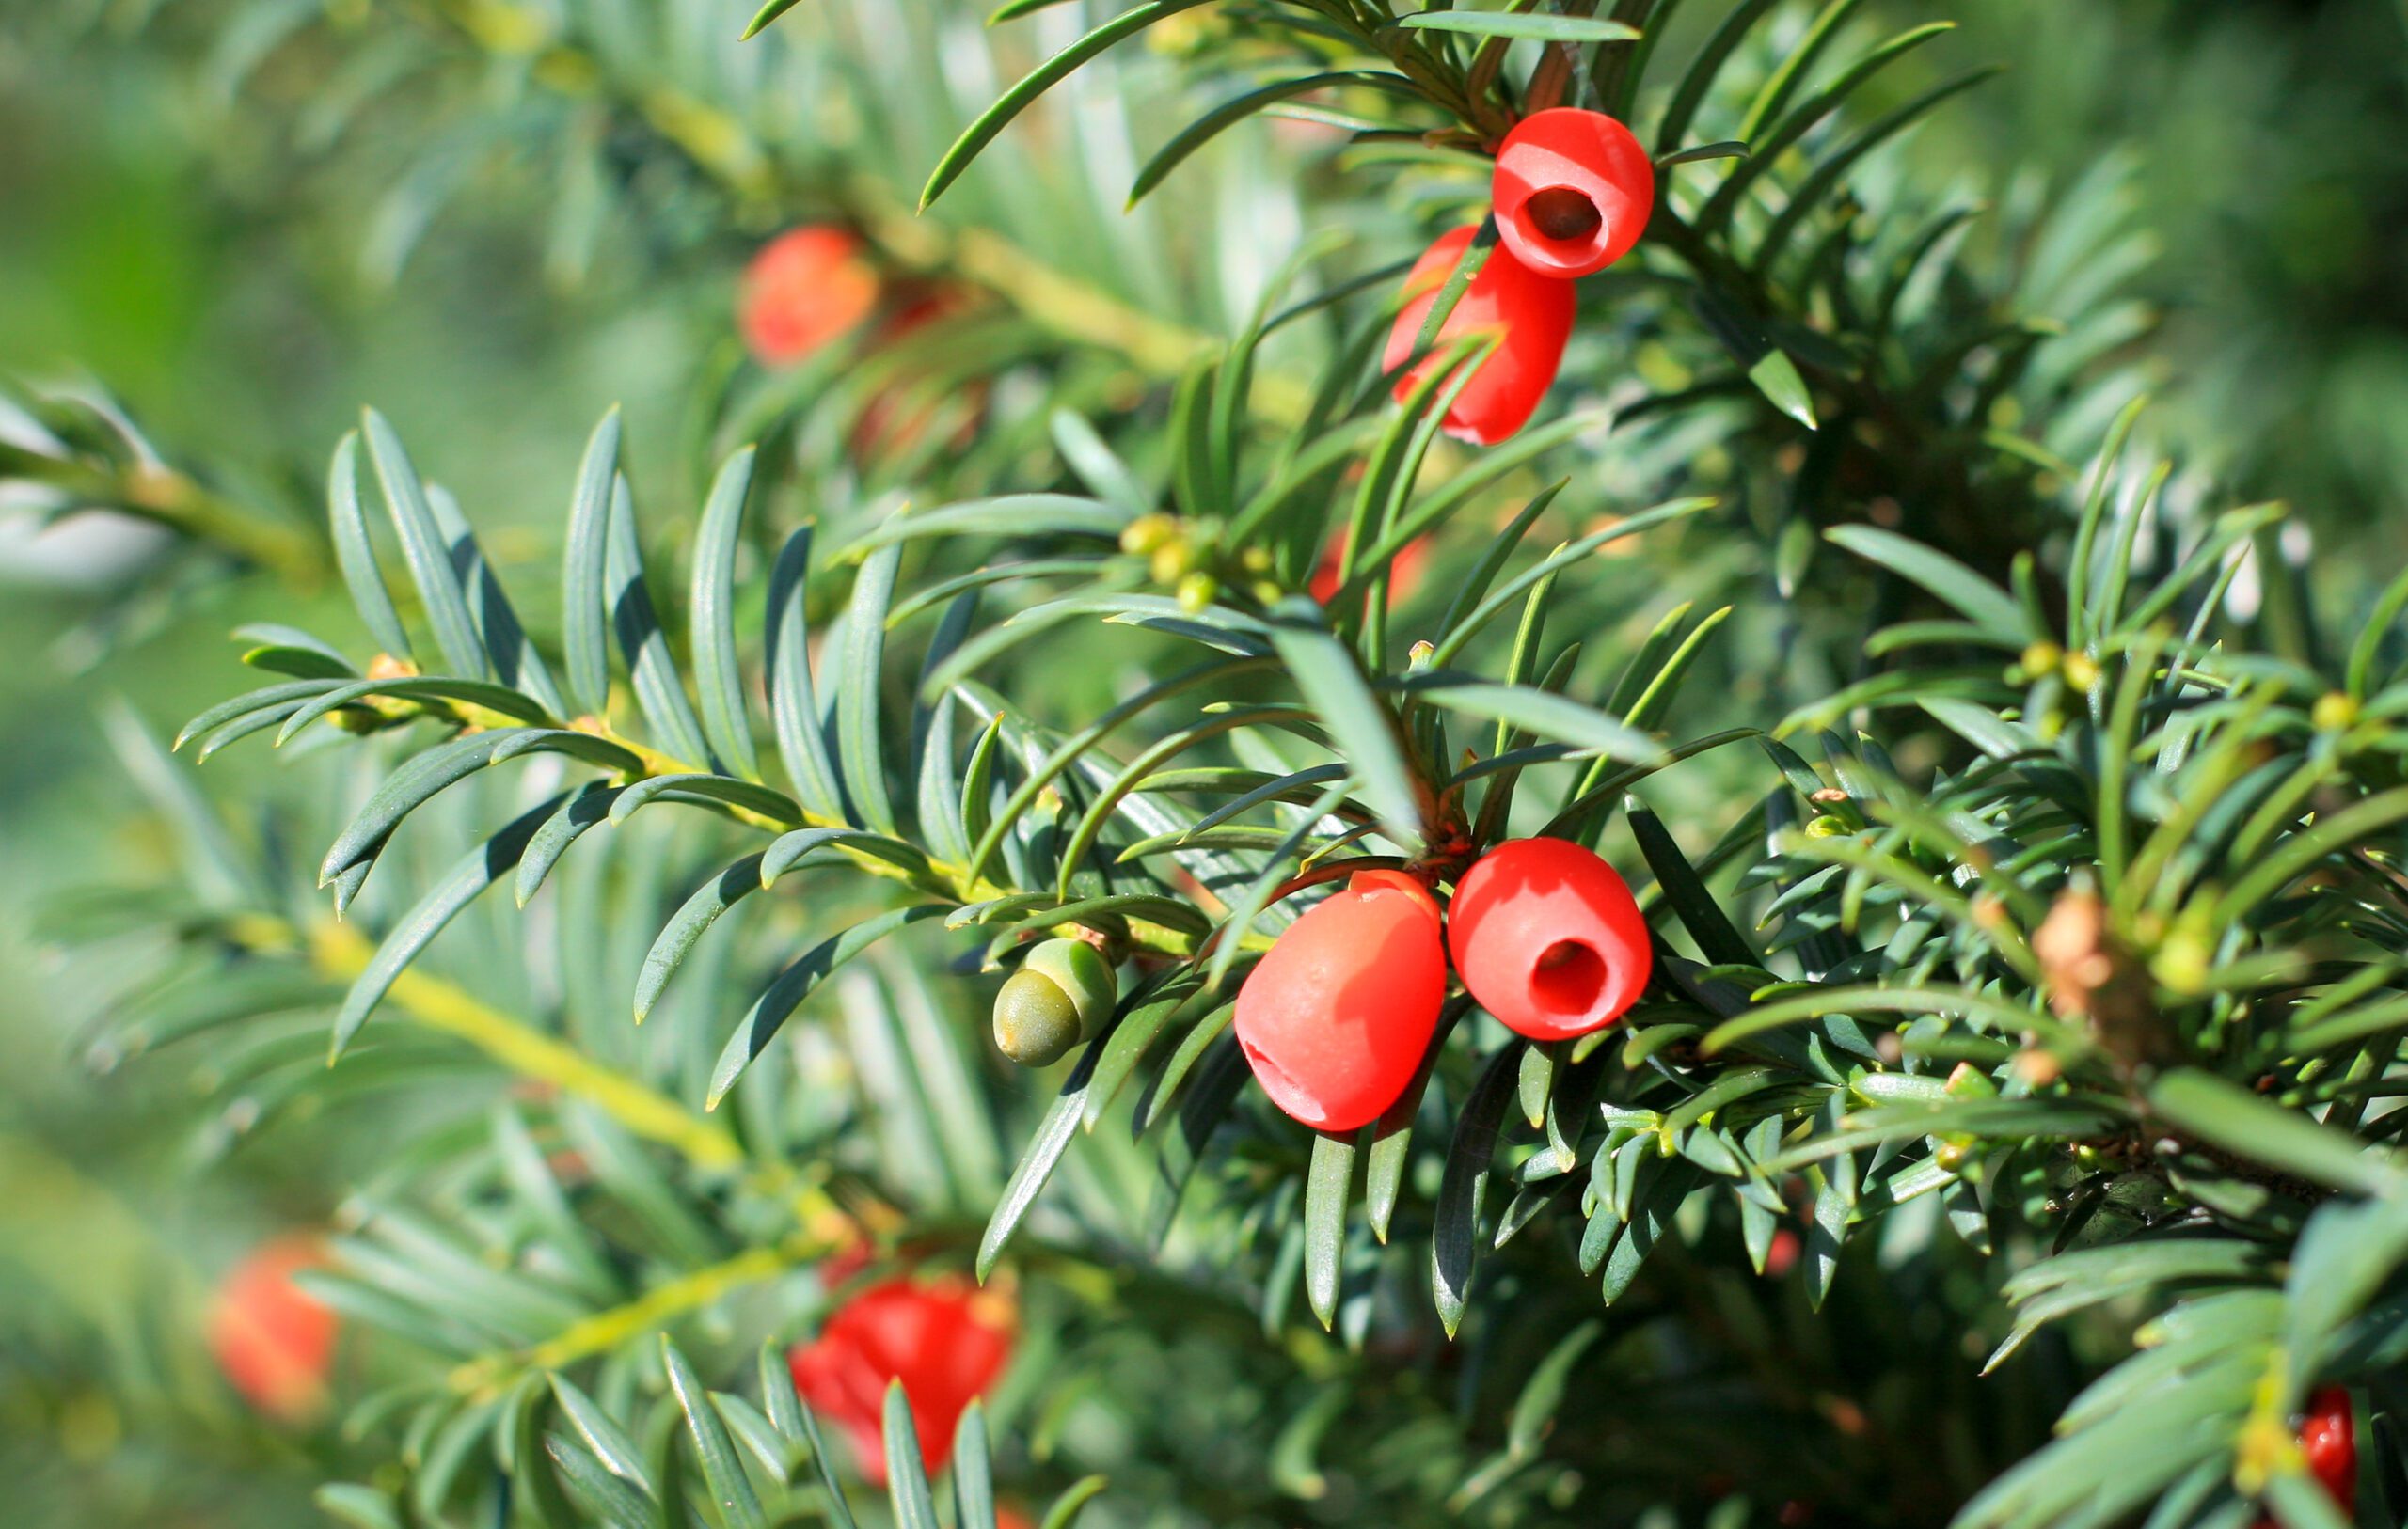 Taxus baccata red berries and green needles